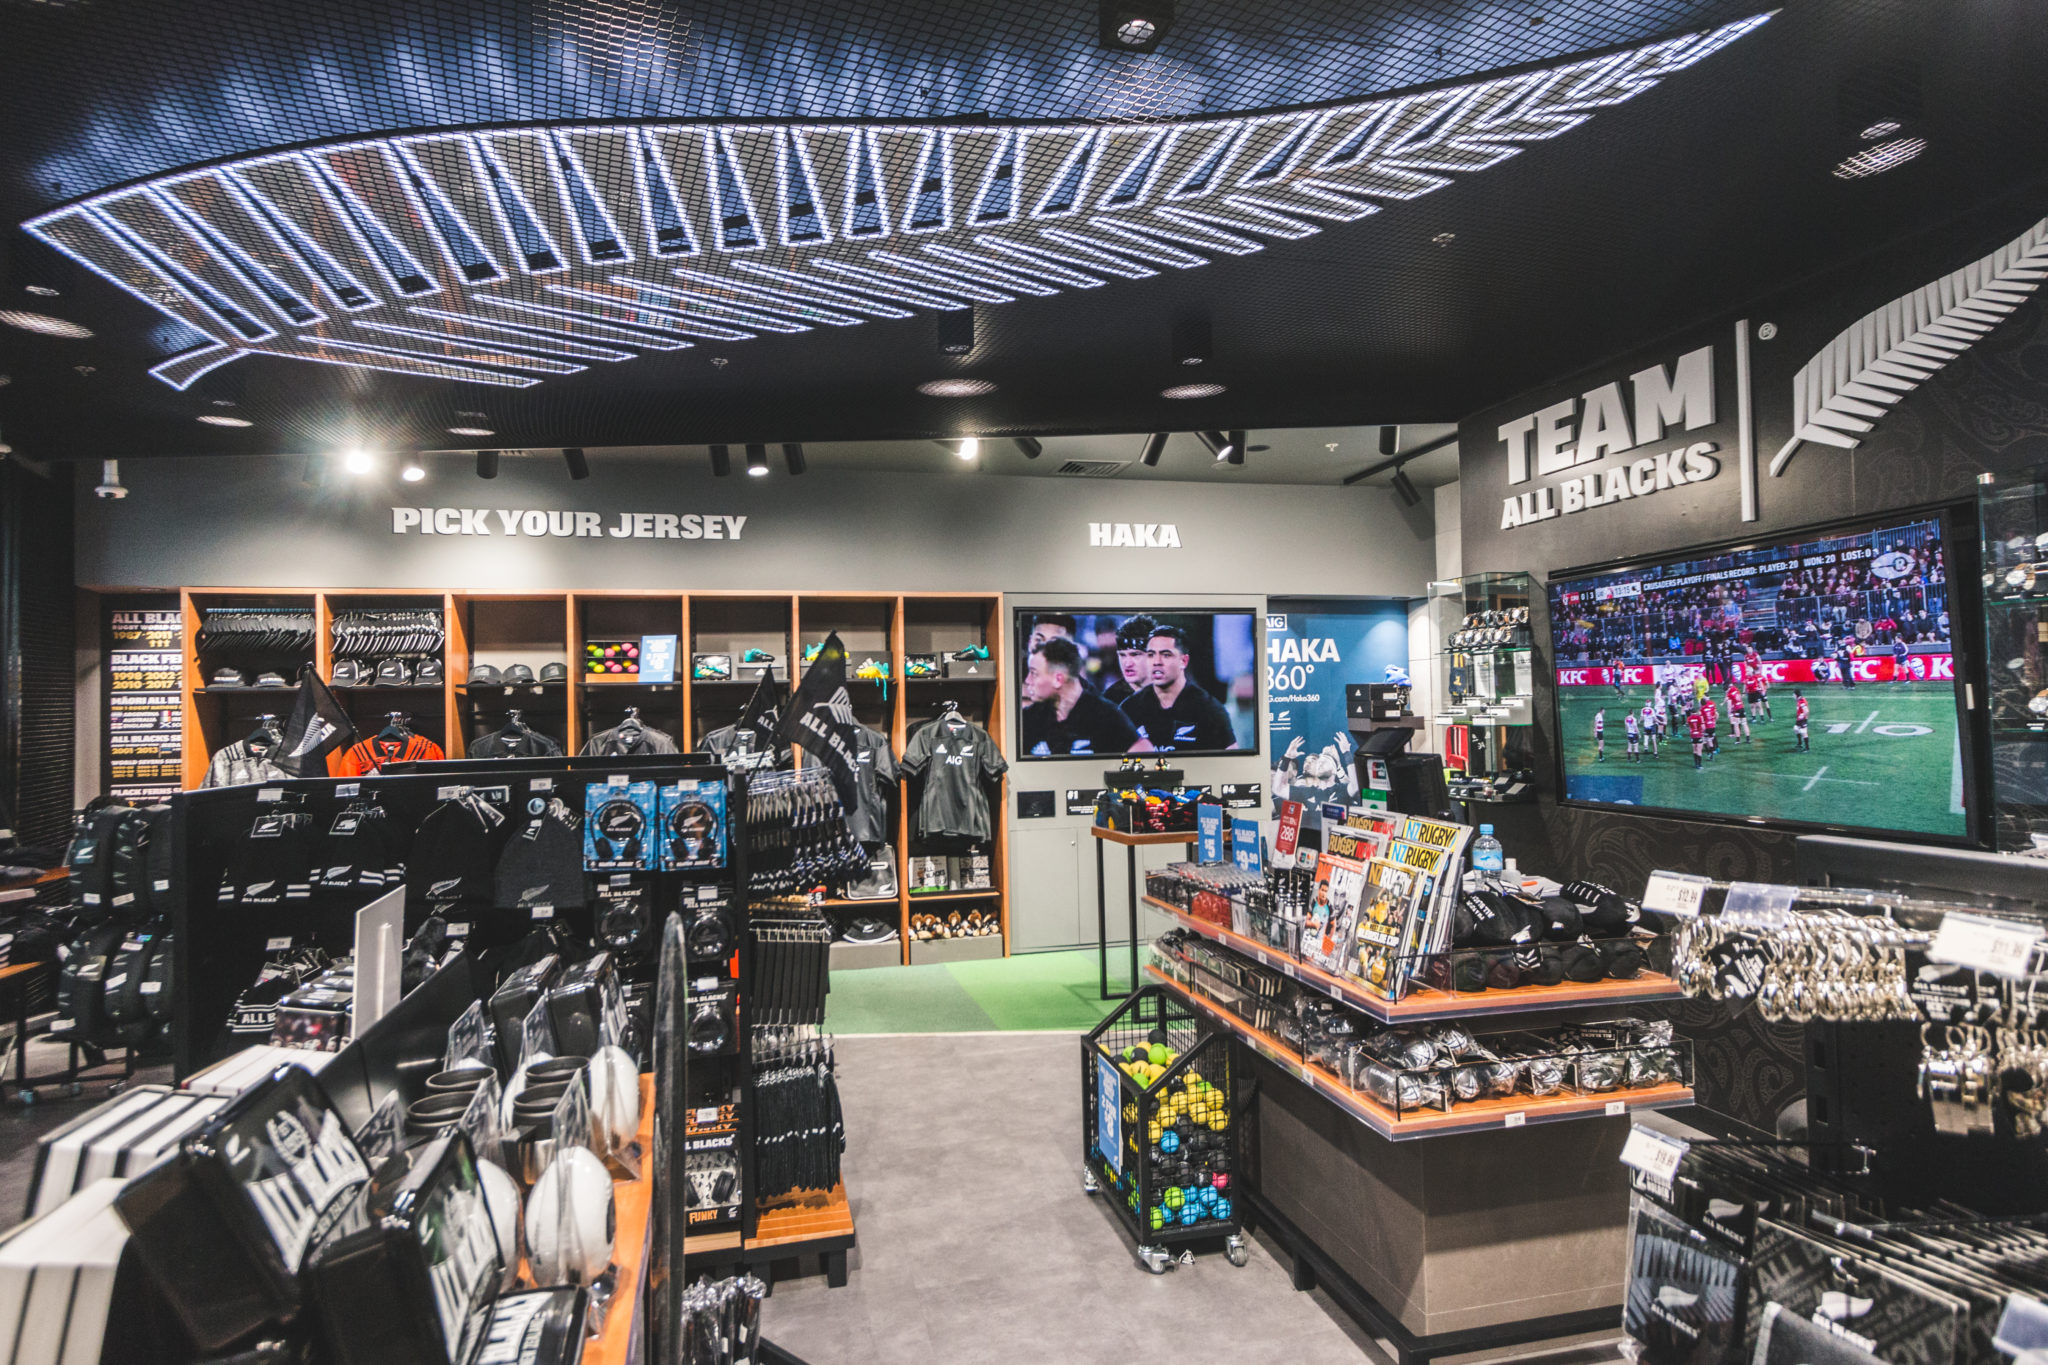 Official All Blacks Store opens featuring an impressive silver fern ceiling display